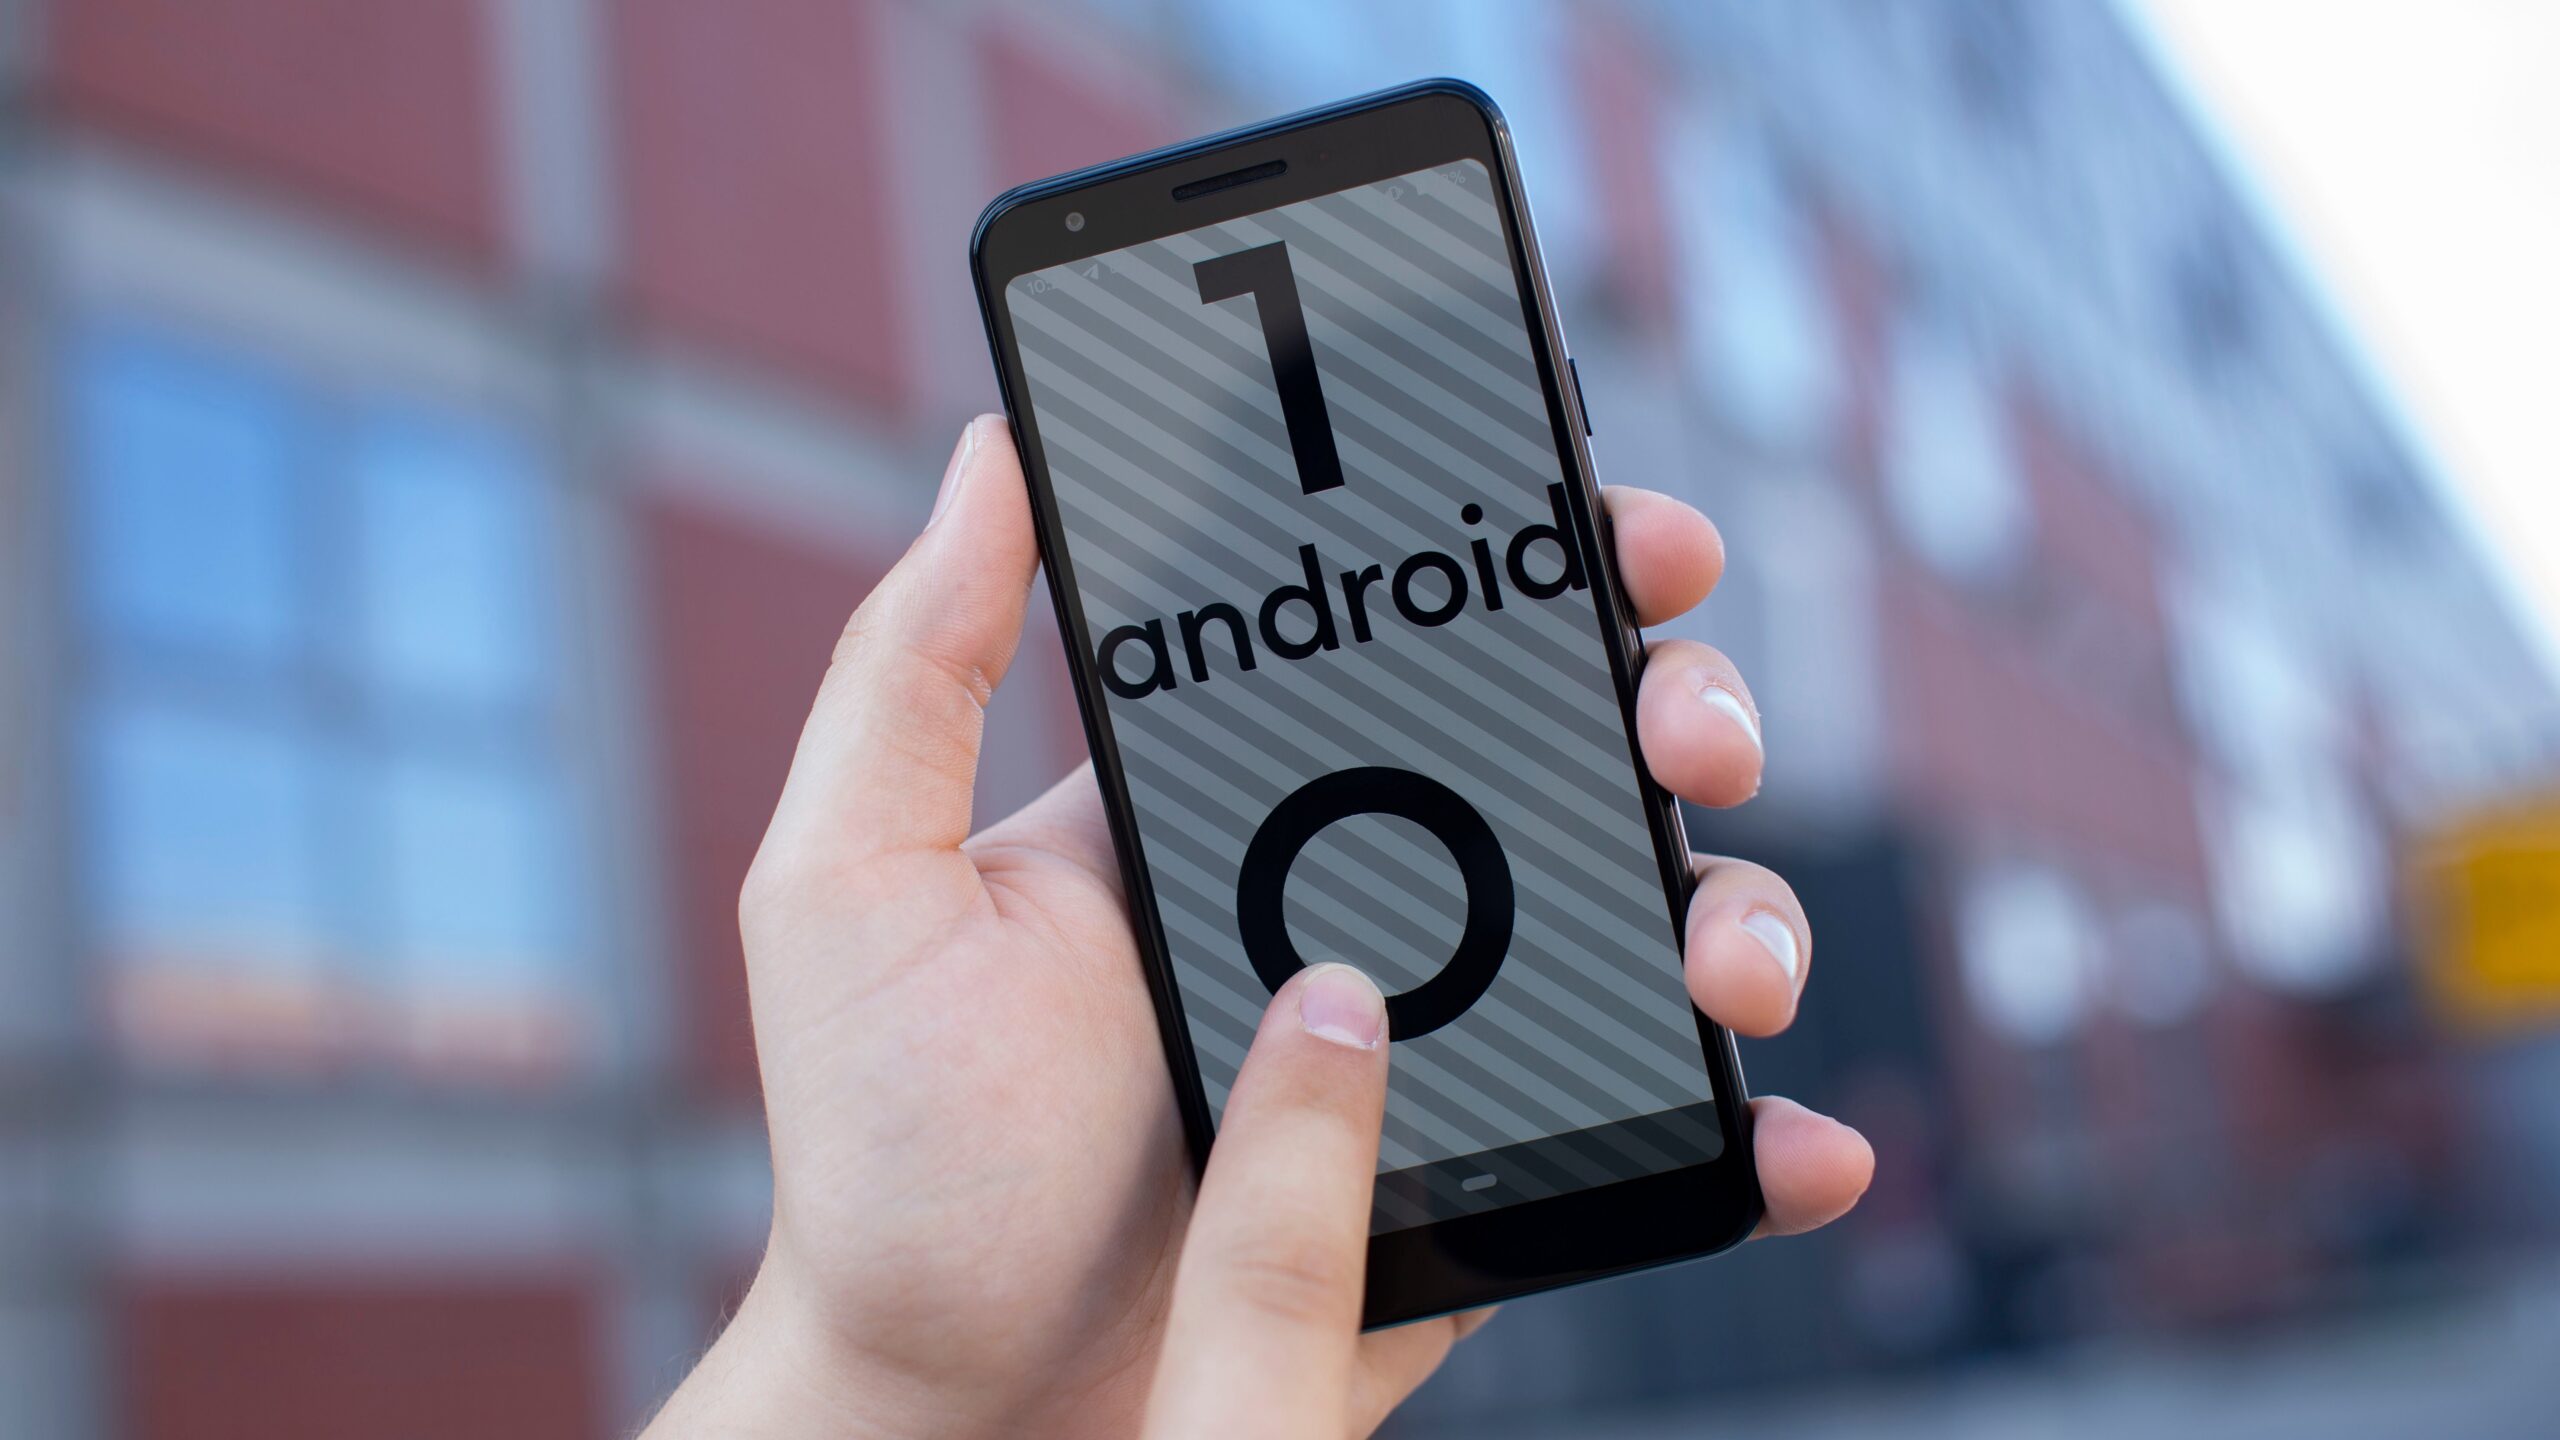 Here is each new gesture of Android 10 explained